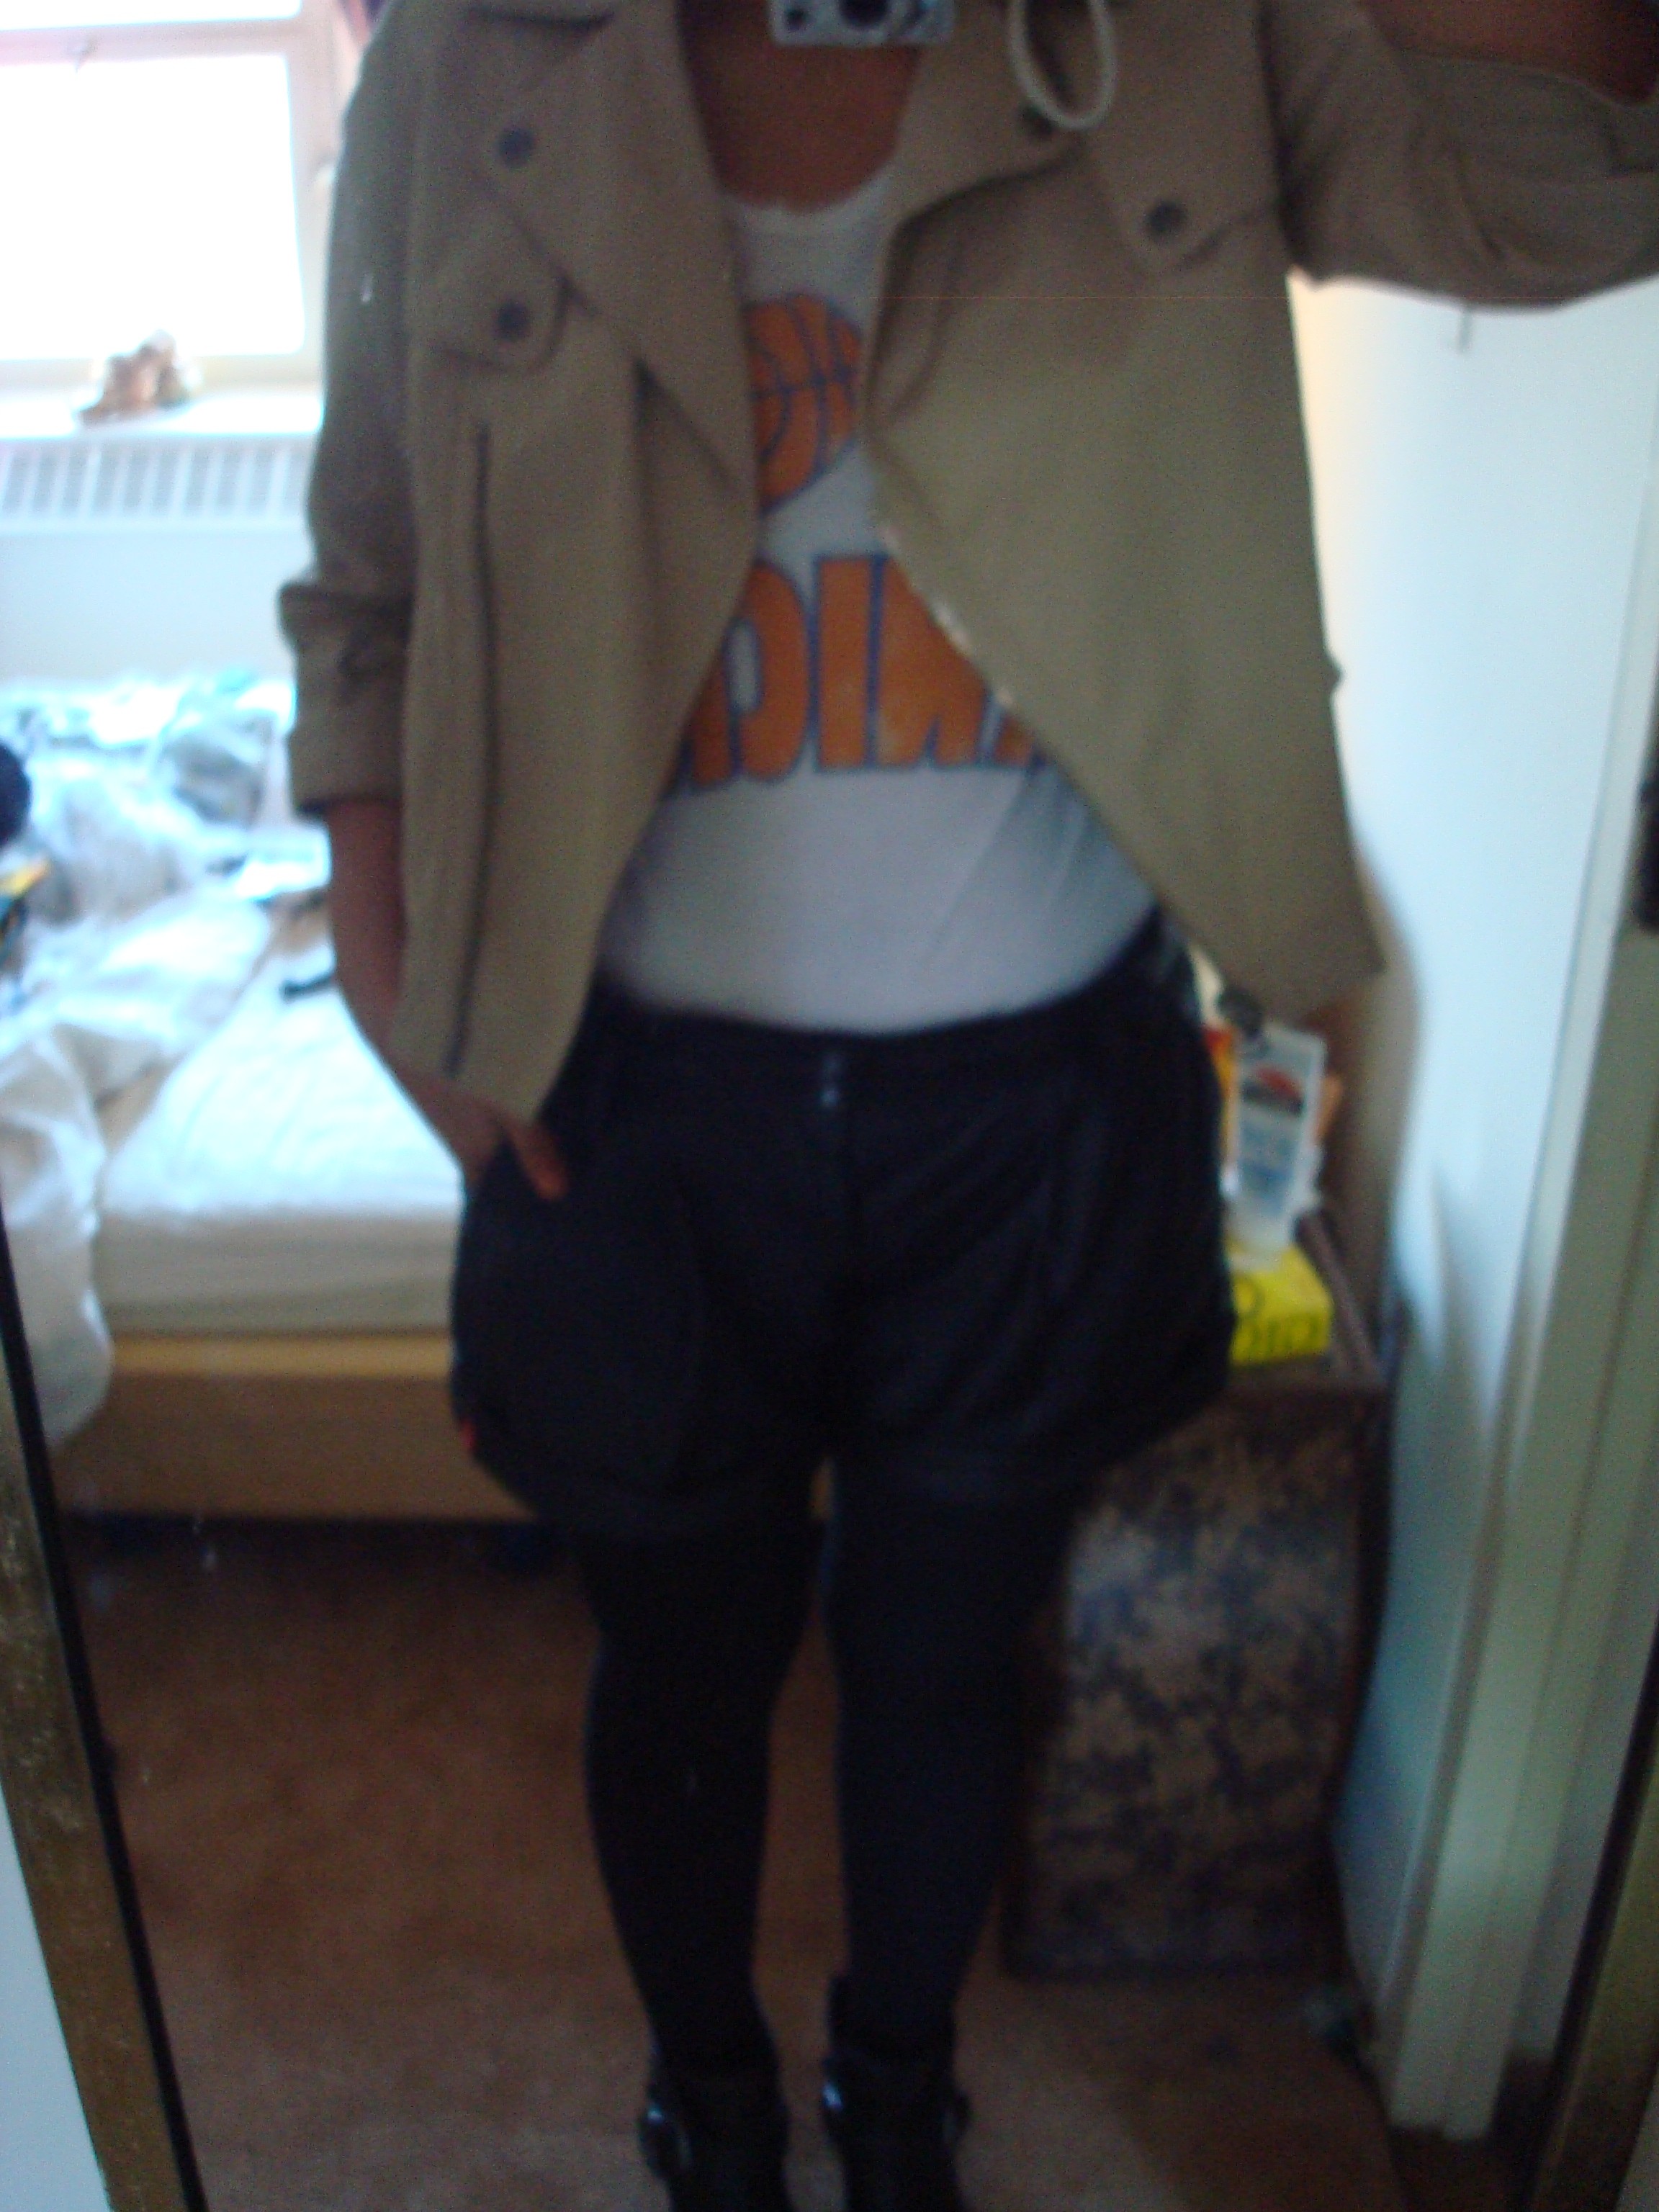 i heart knicks tee-urban outfitters; moto jacket-gap (thrifted @ buffalo exchange); leather shorts-espirit clearance, boots-urban outfitters